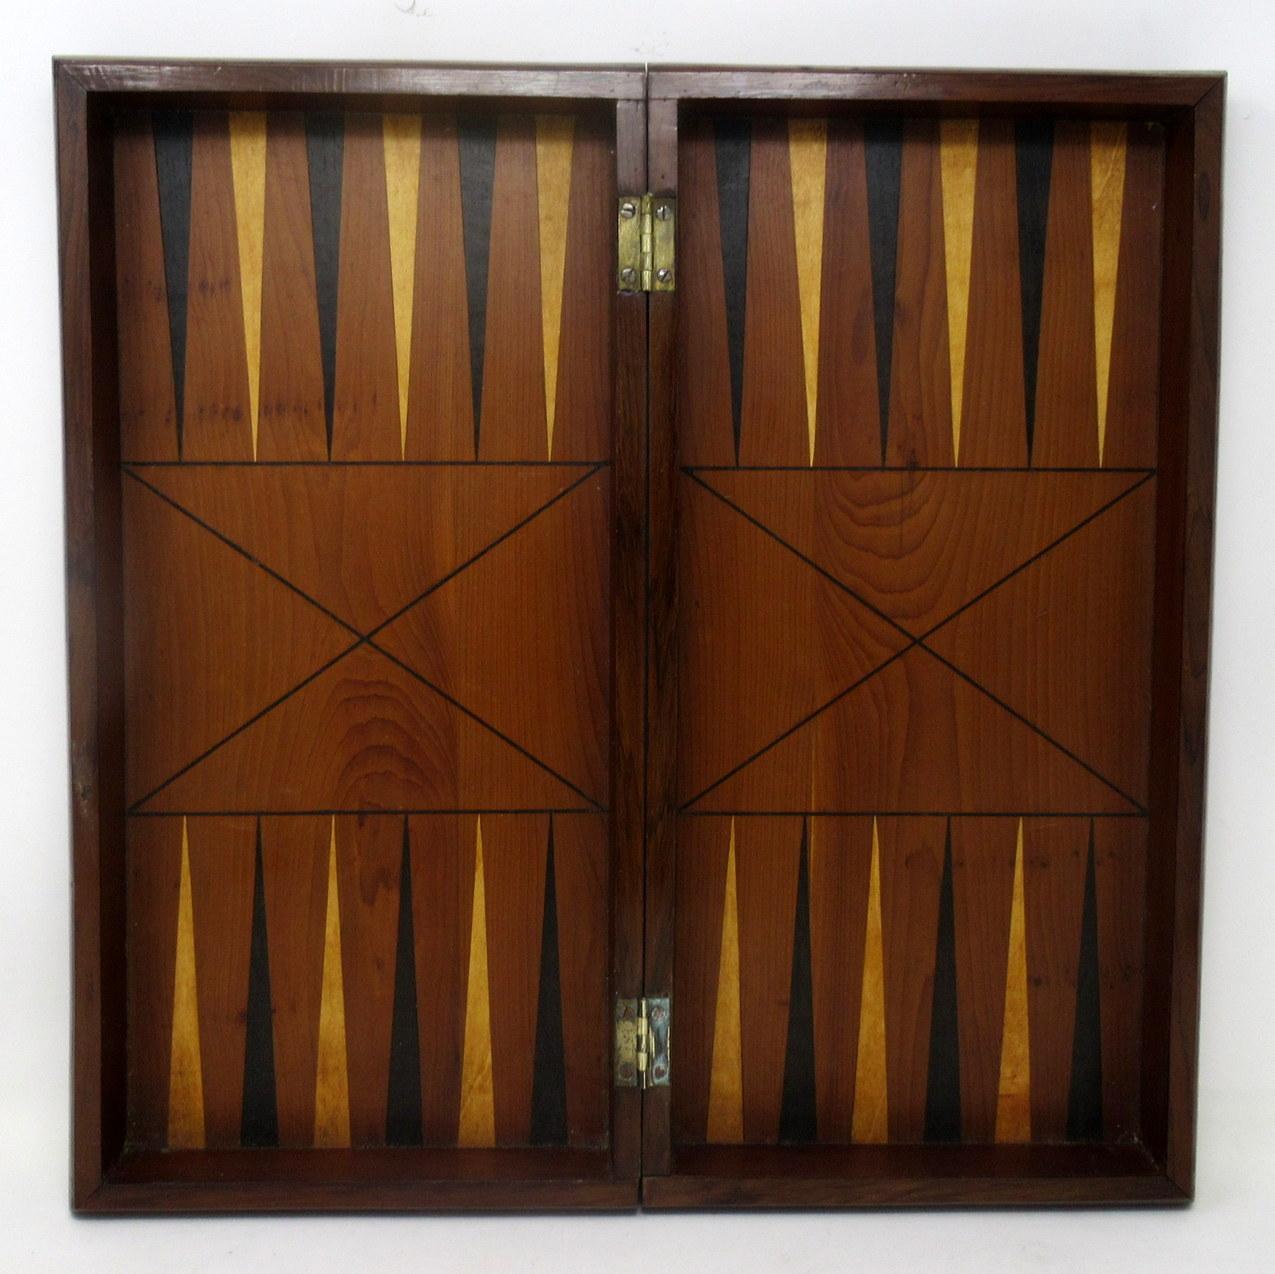 Fine Example of an Irish Killarney Ware Arbutus Wood Backgammon and Chess Board of medium proportions and folding rectangular shape, mid-19th century.

The main parquetry chess game area enclosed by an alternating border inside a plain wider